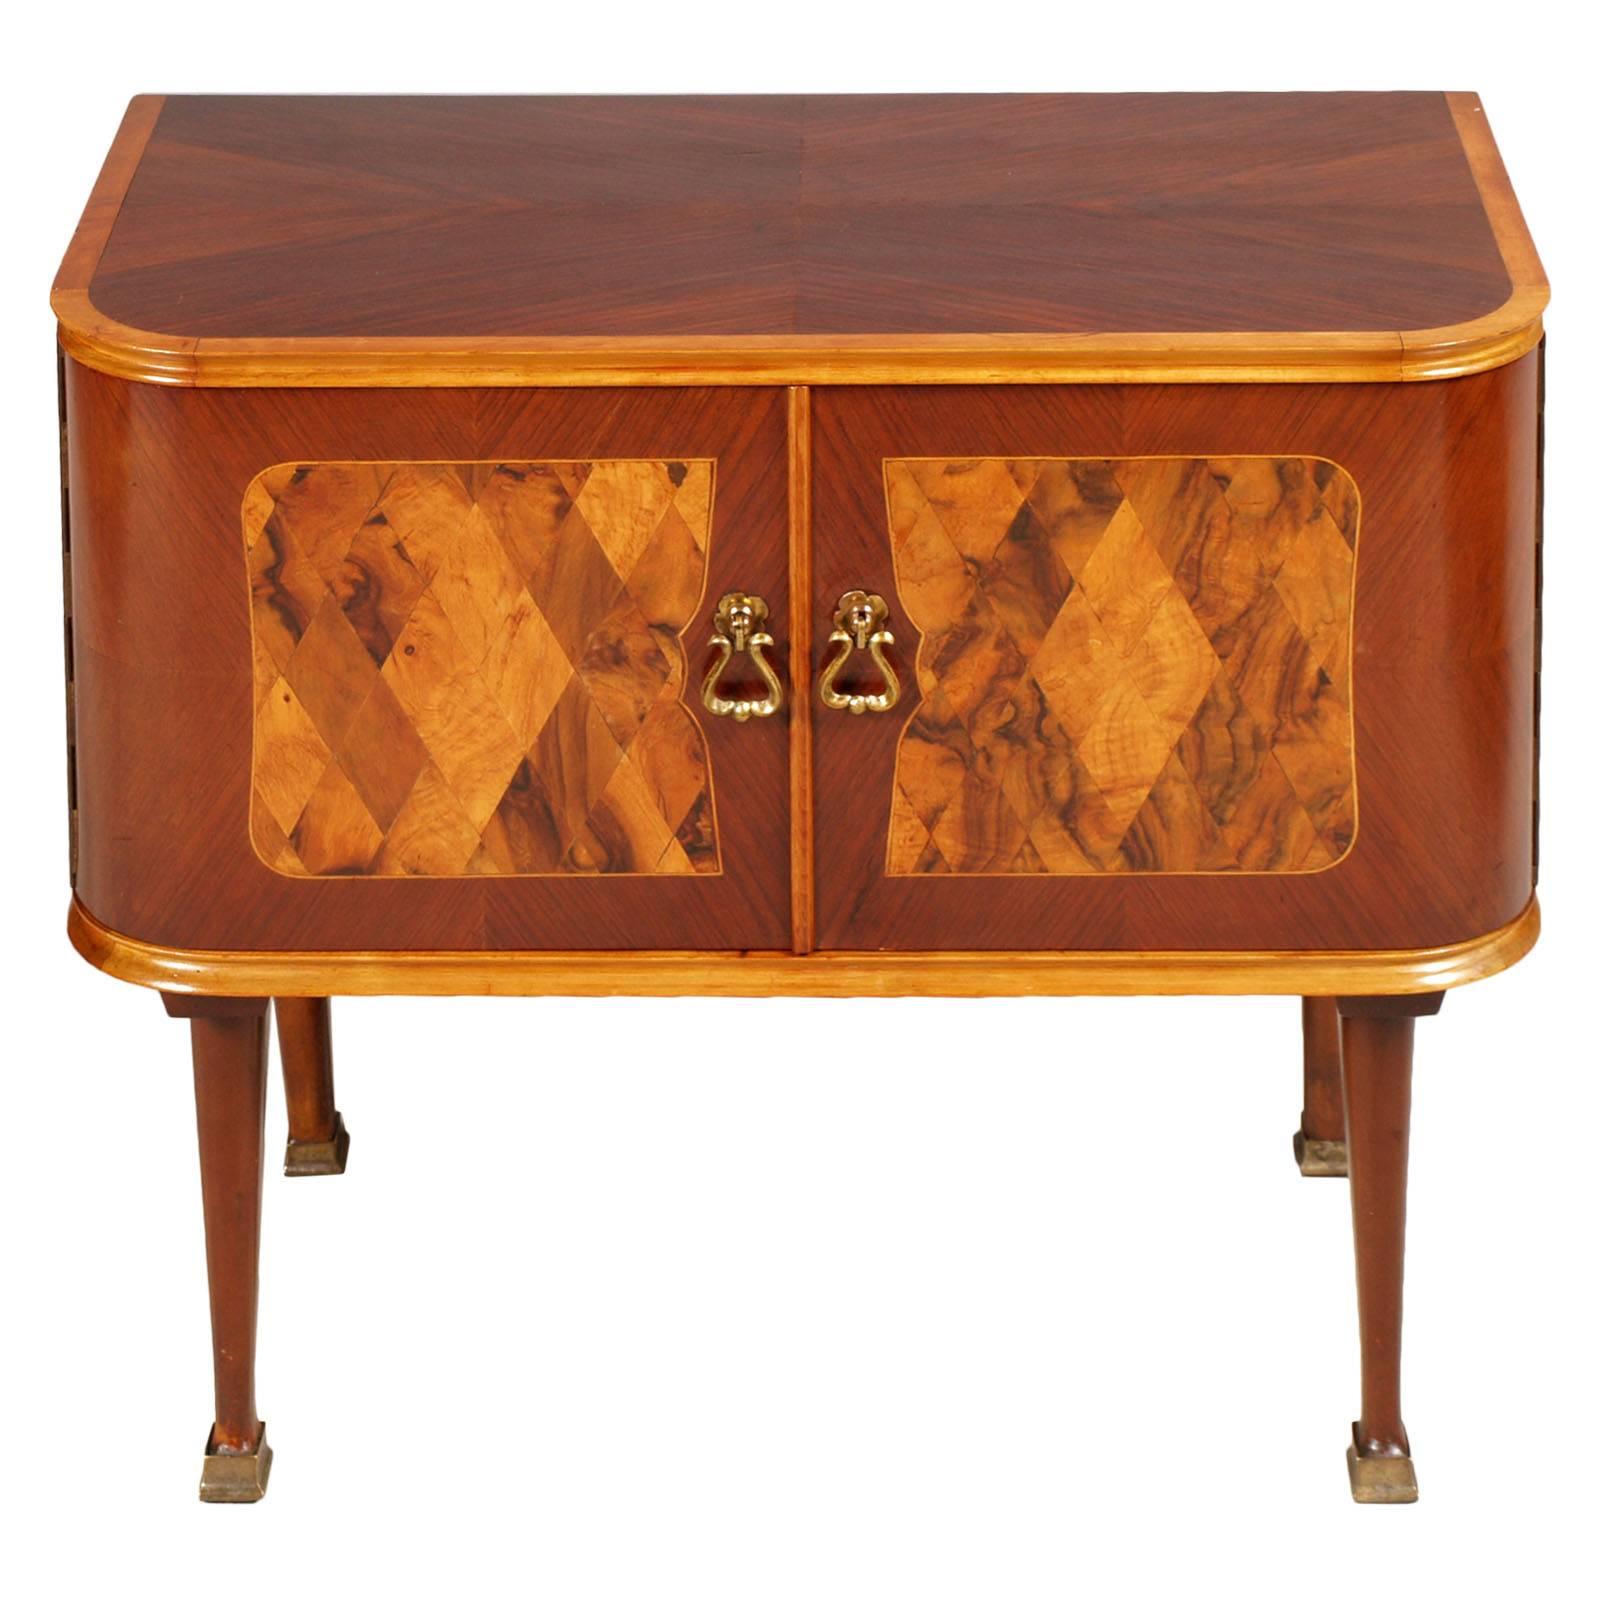 Nice 1930s bedside table in walnut, veneer and burl walnut inlaid, attributed to Paolo Buffa for Consorzio Esposizione Mobili Cantù, with originals golden bronze accessories. 

Measures cm: H 54, W 62, D 33.
  